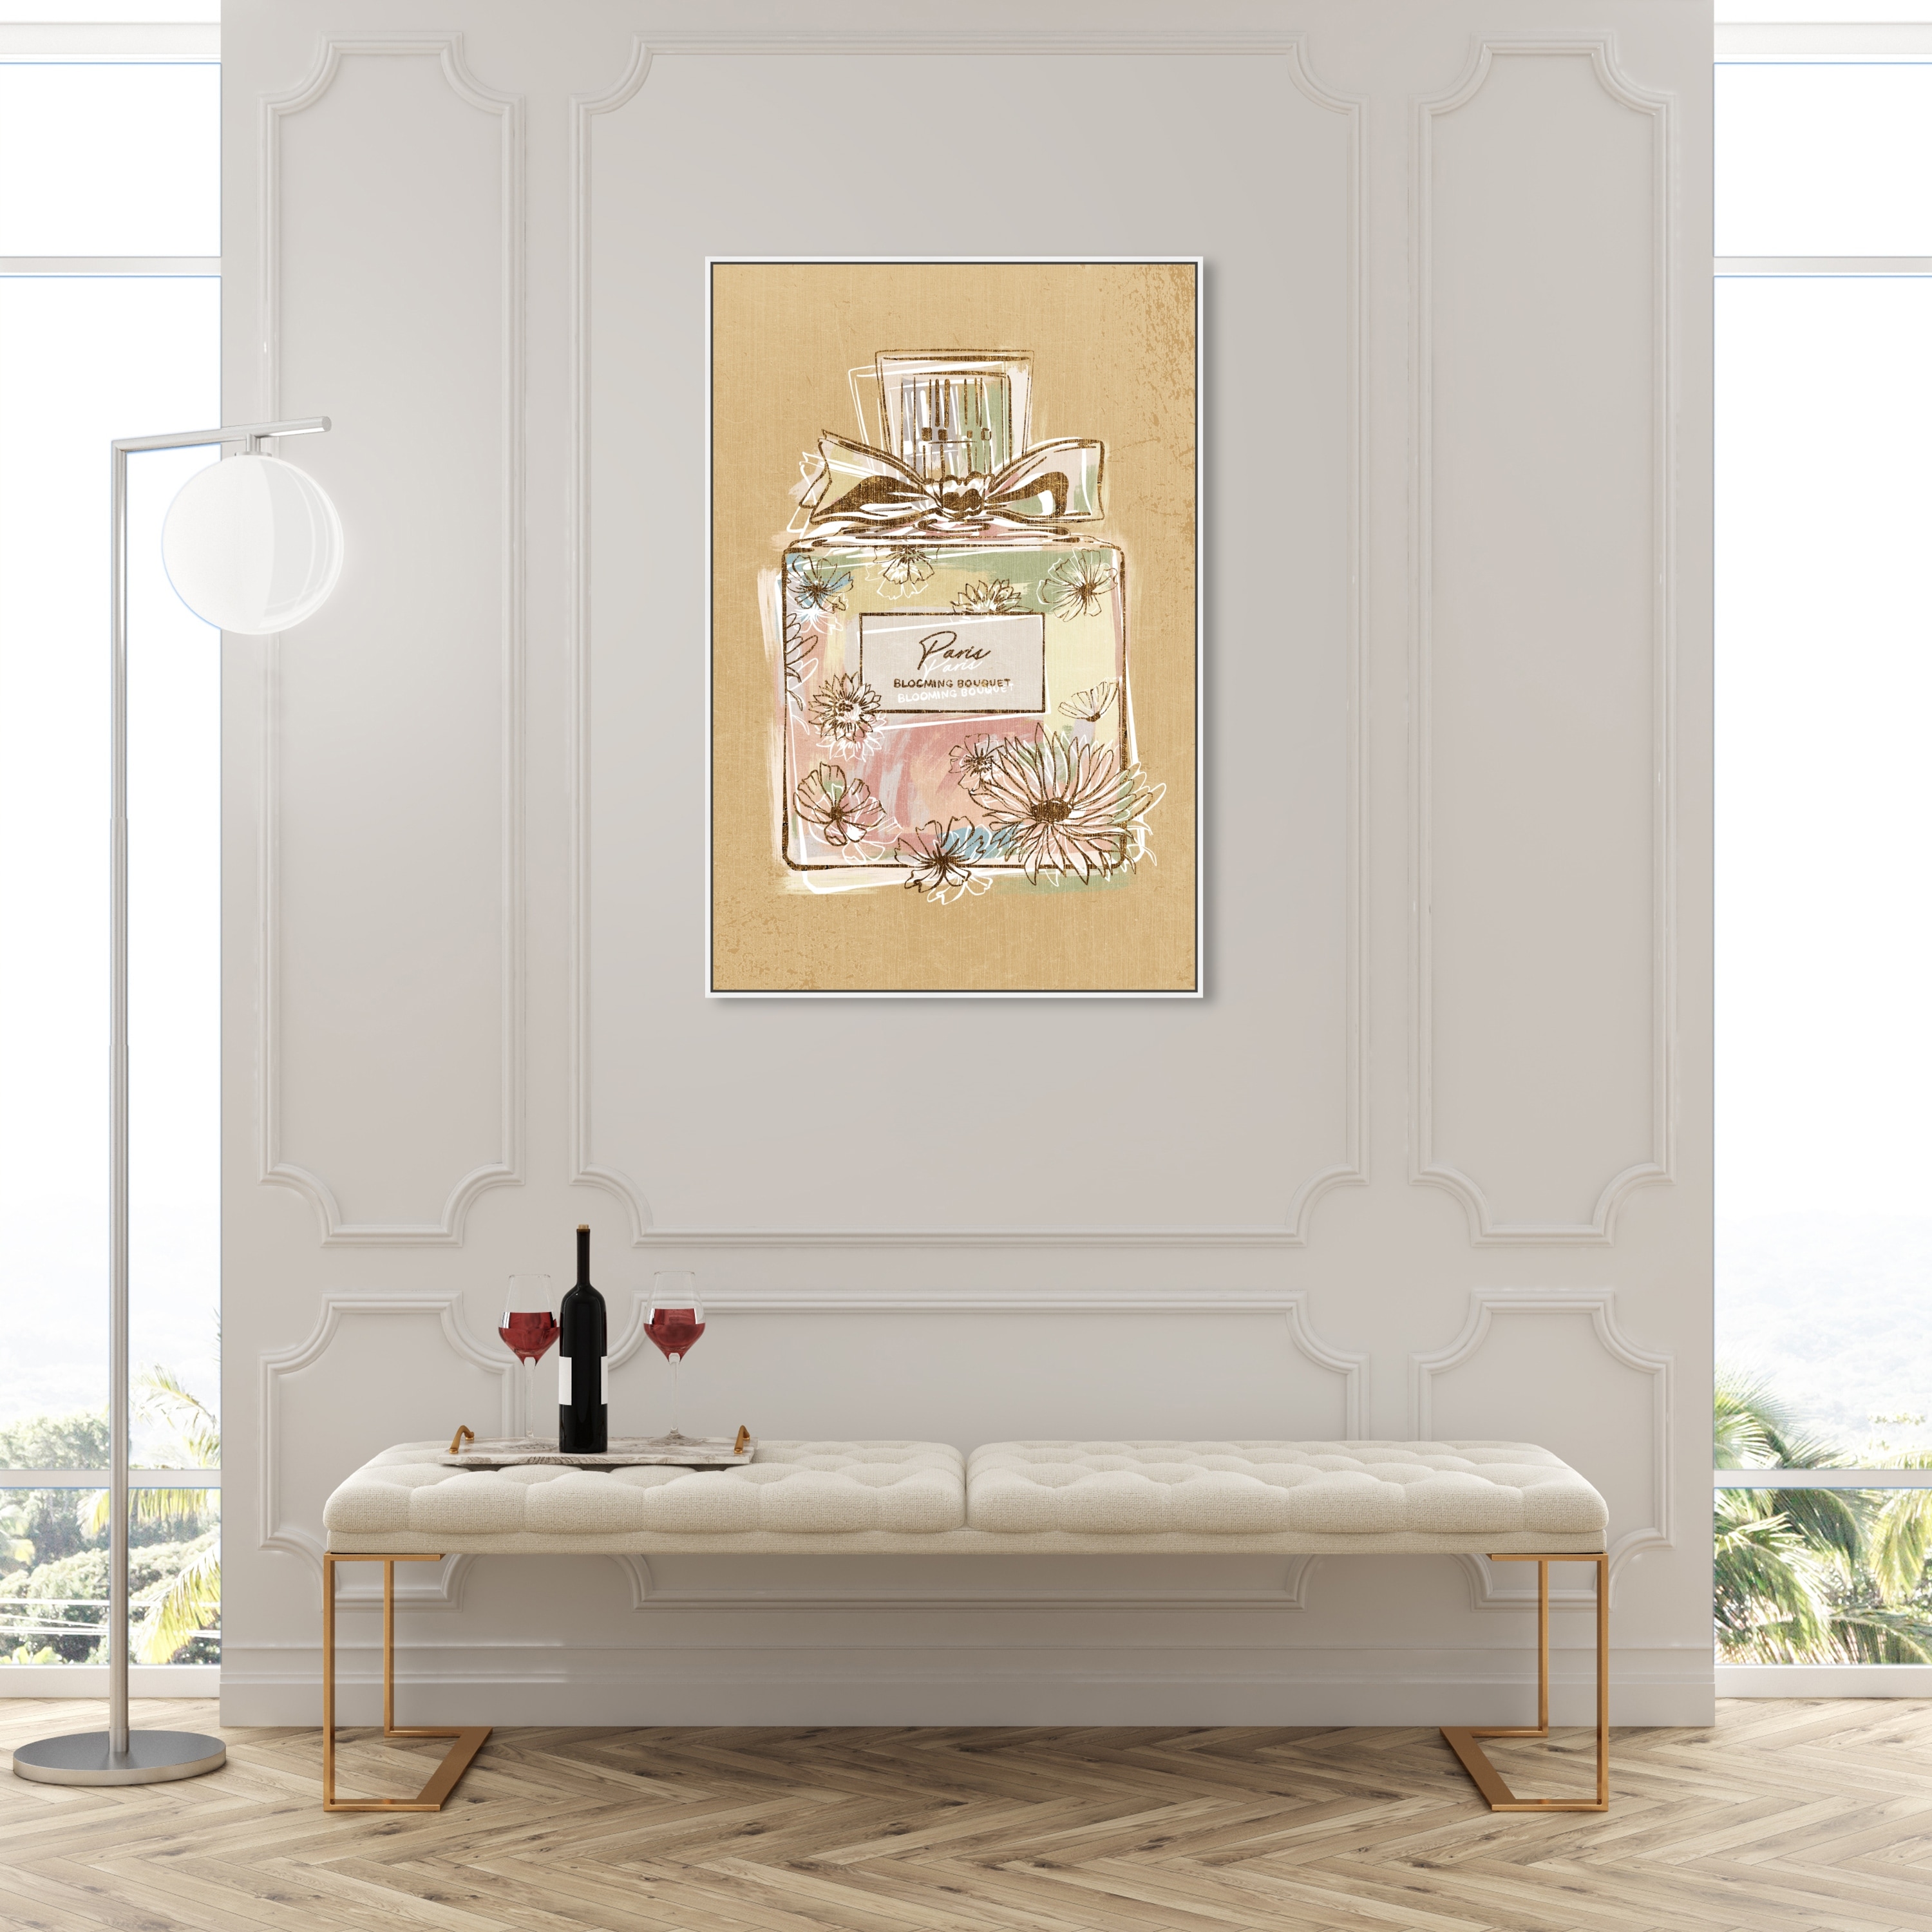 Oliver Gal 'Floral Perfume Bloom' Glam Gold Wall Art Canvas Print